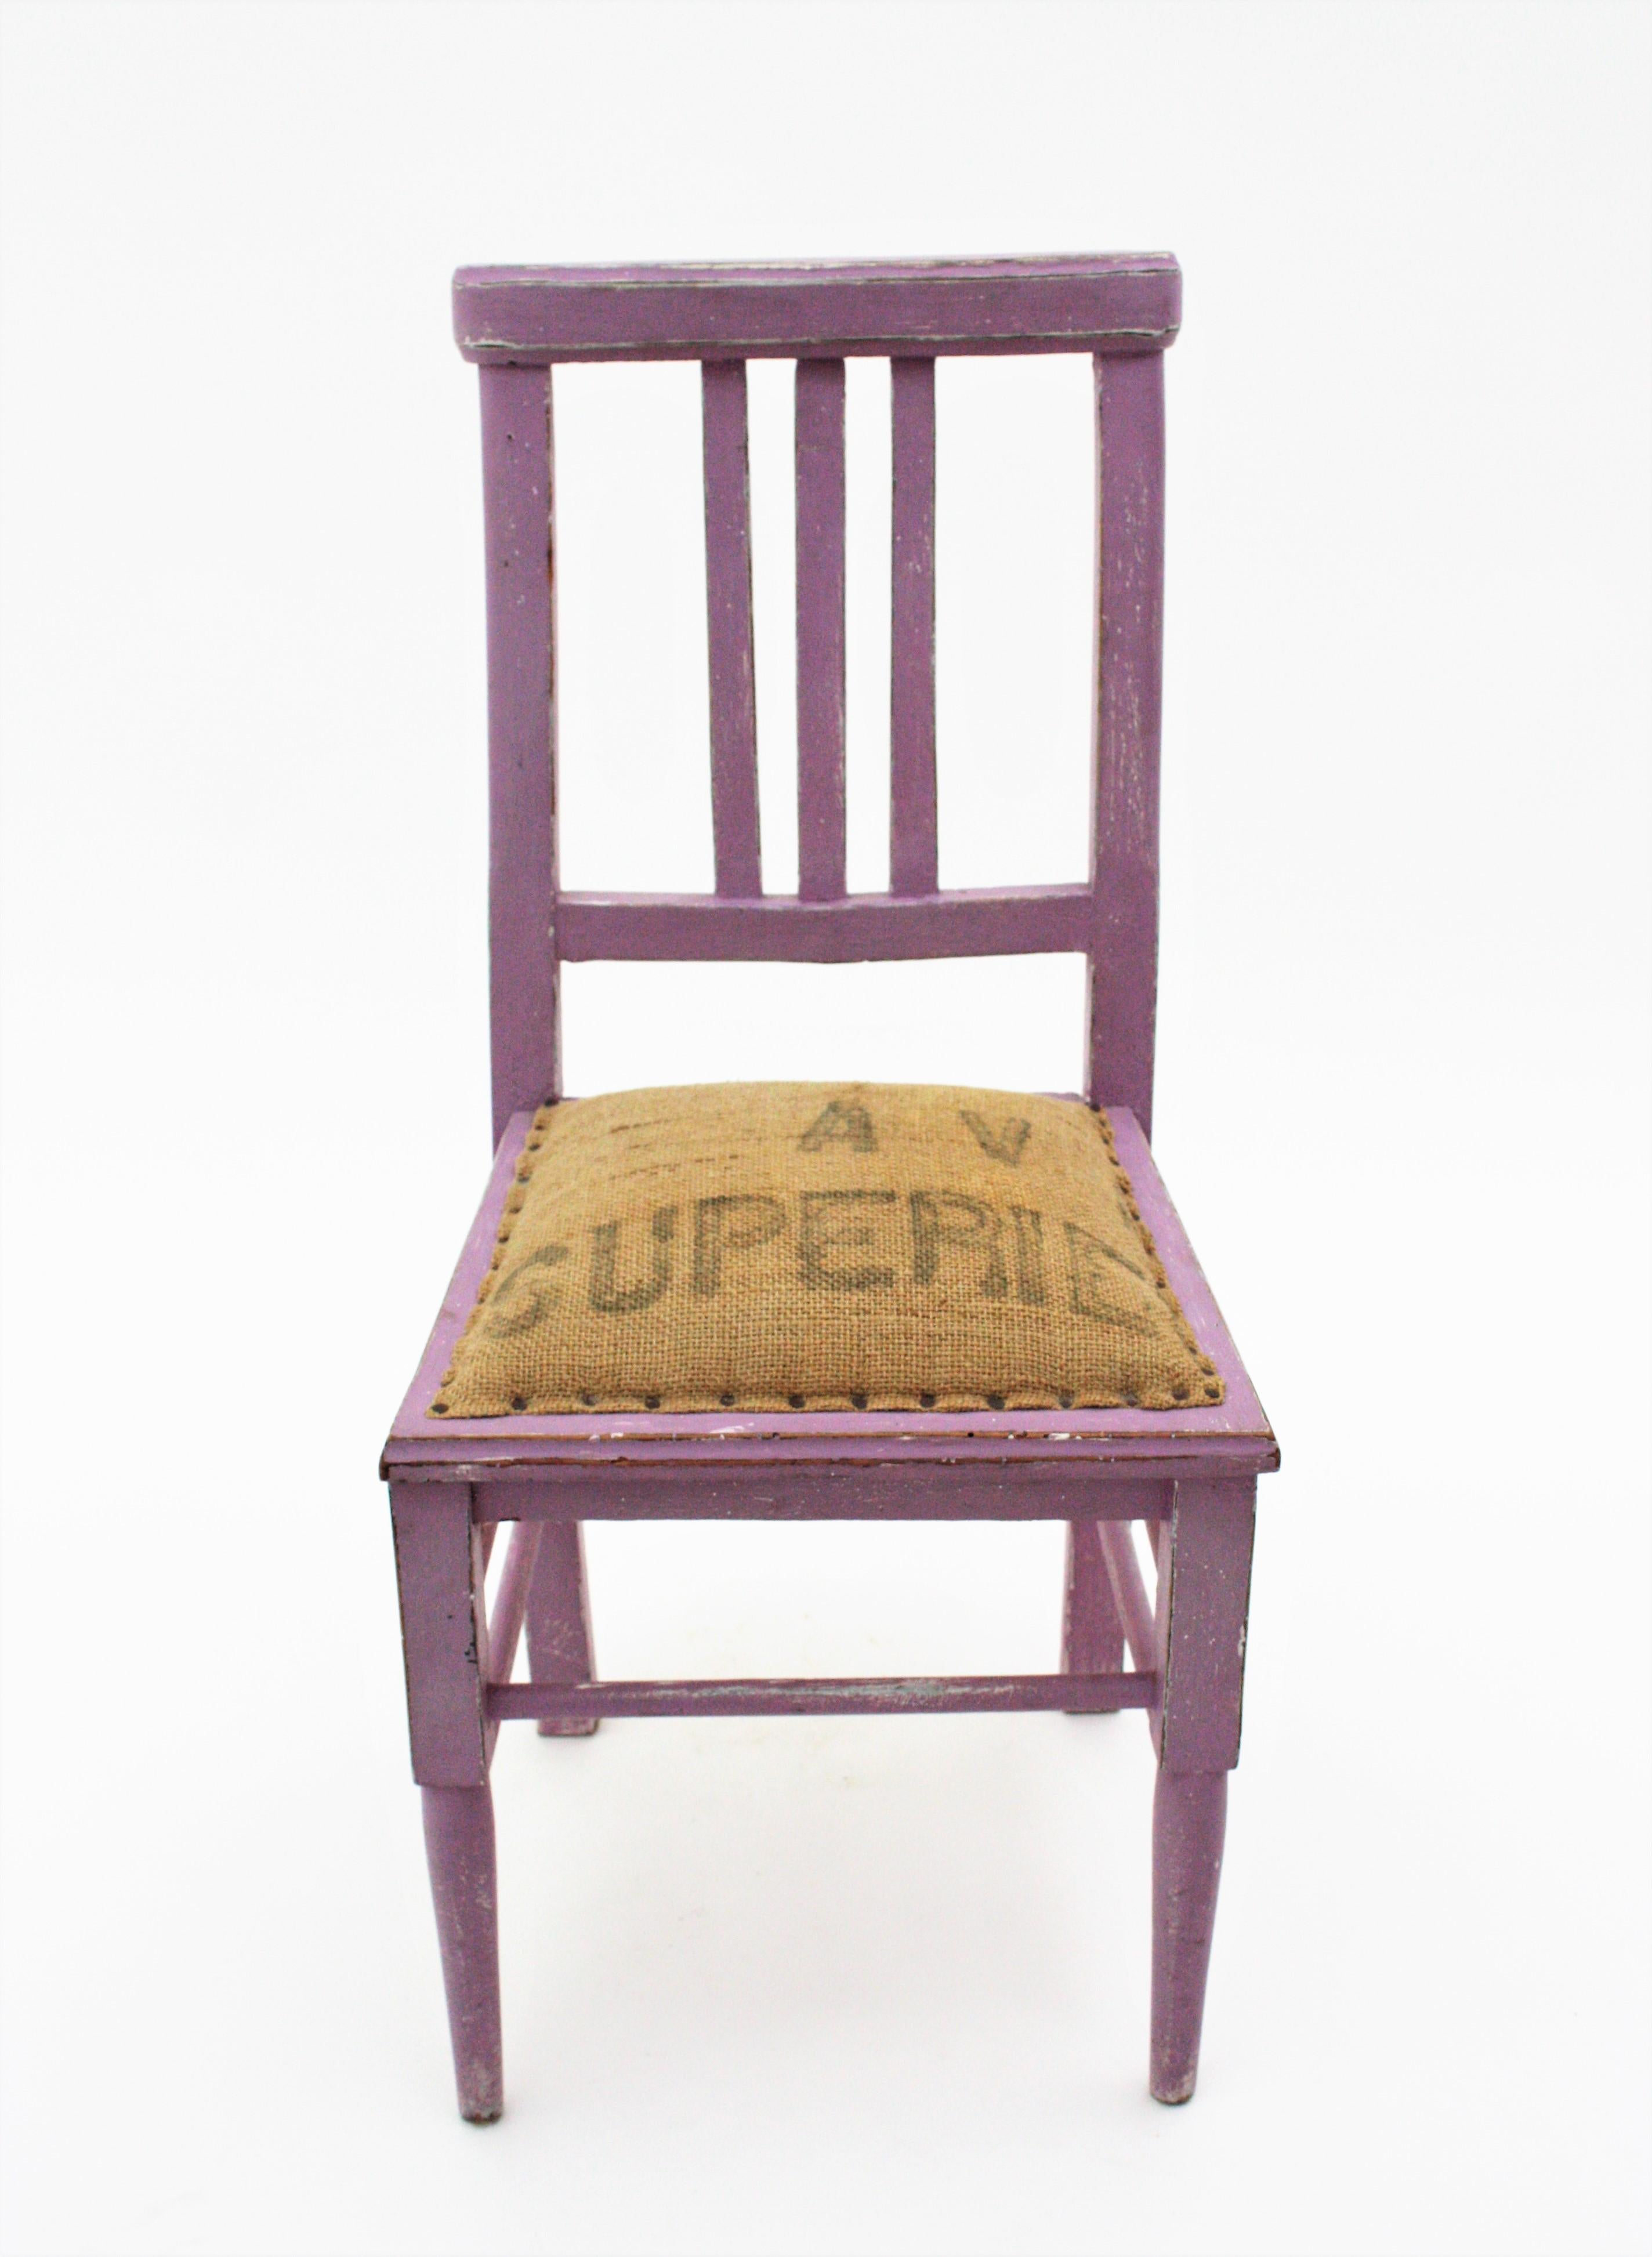 A cool wooden child chair in lavender patina. France, 1940s
This cute chair is handcrafted in wood and painted in lavender color. The seat is upholstered with grain burlap sacks.
It has all the taste of the french Provence.
A good addition to be